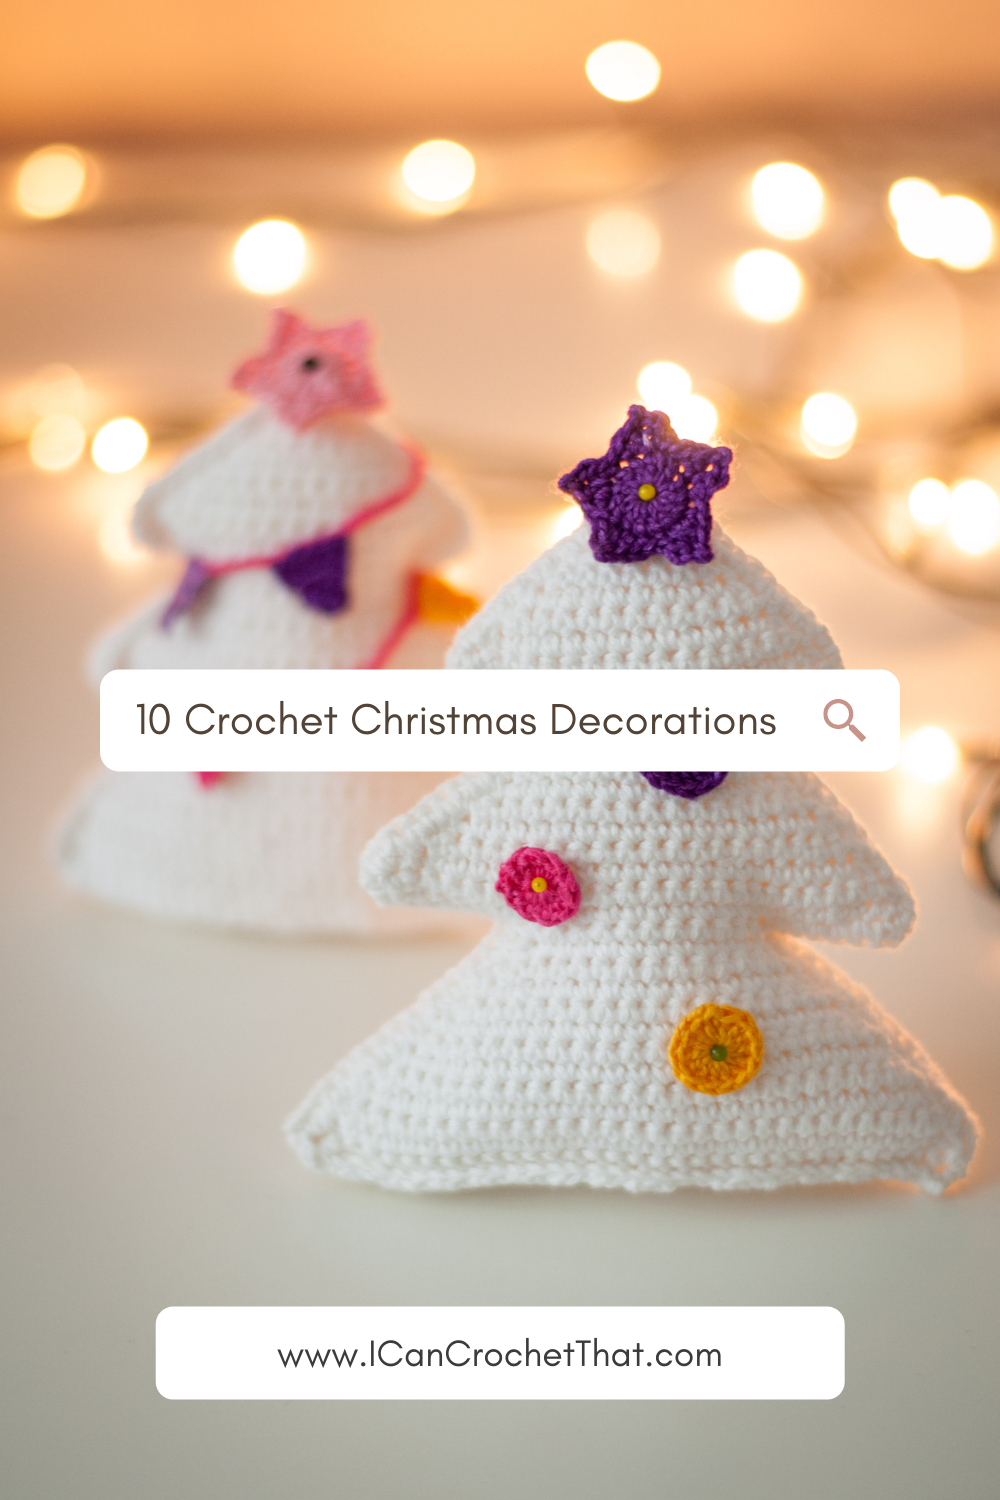 Deck the Halls with These 10 Crochet Christmas Decorations